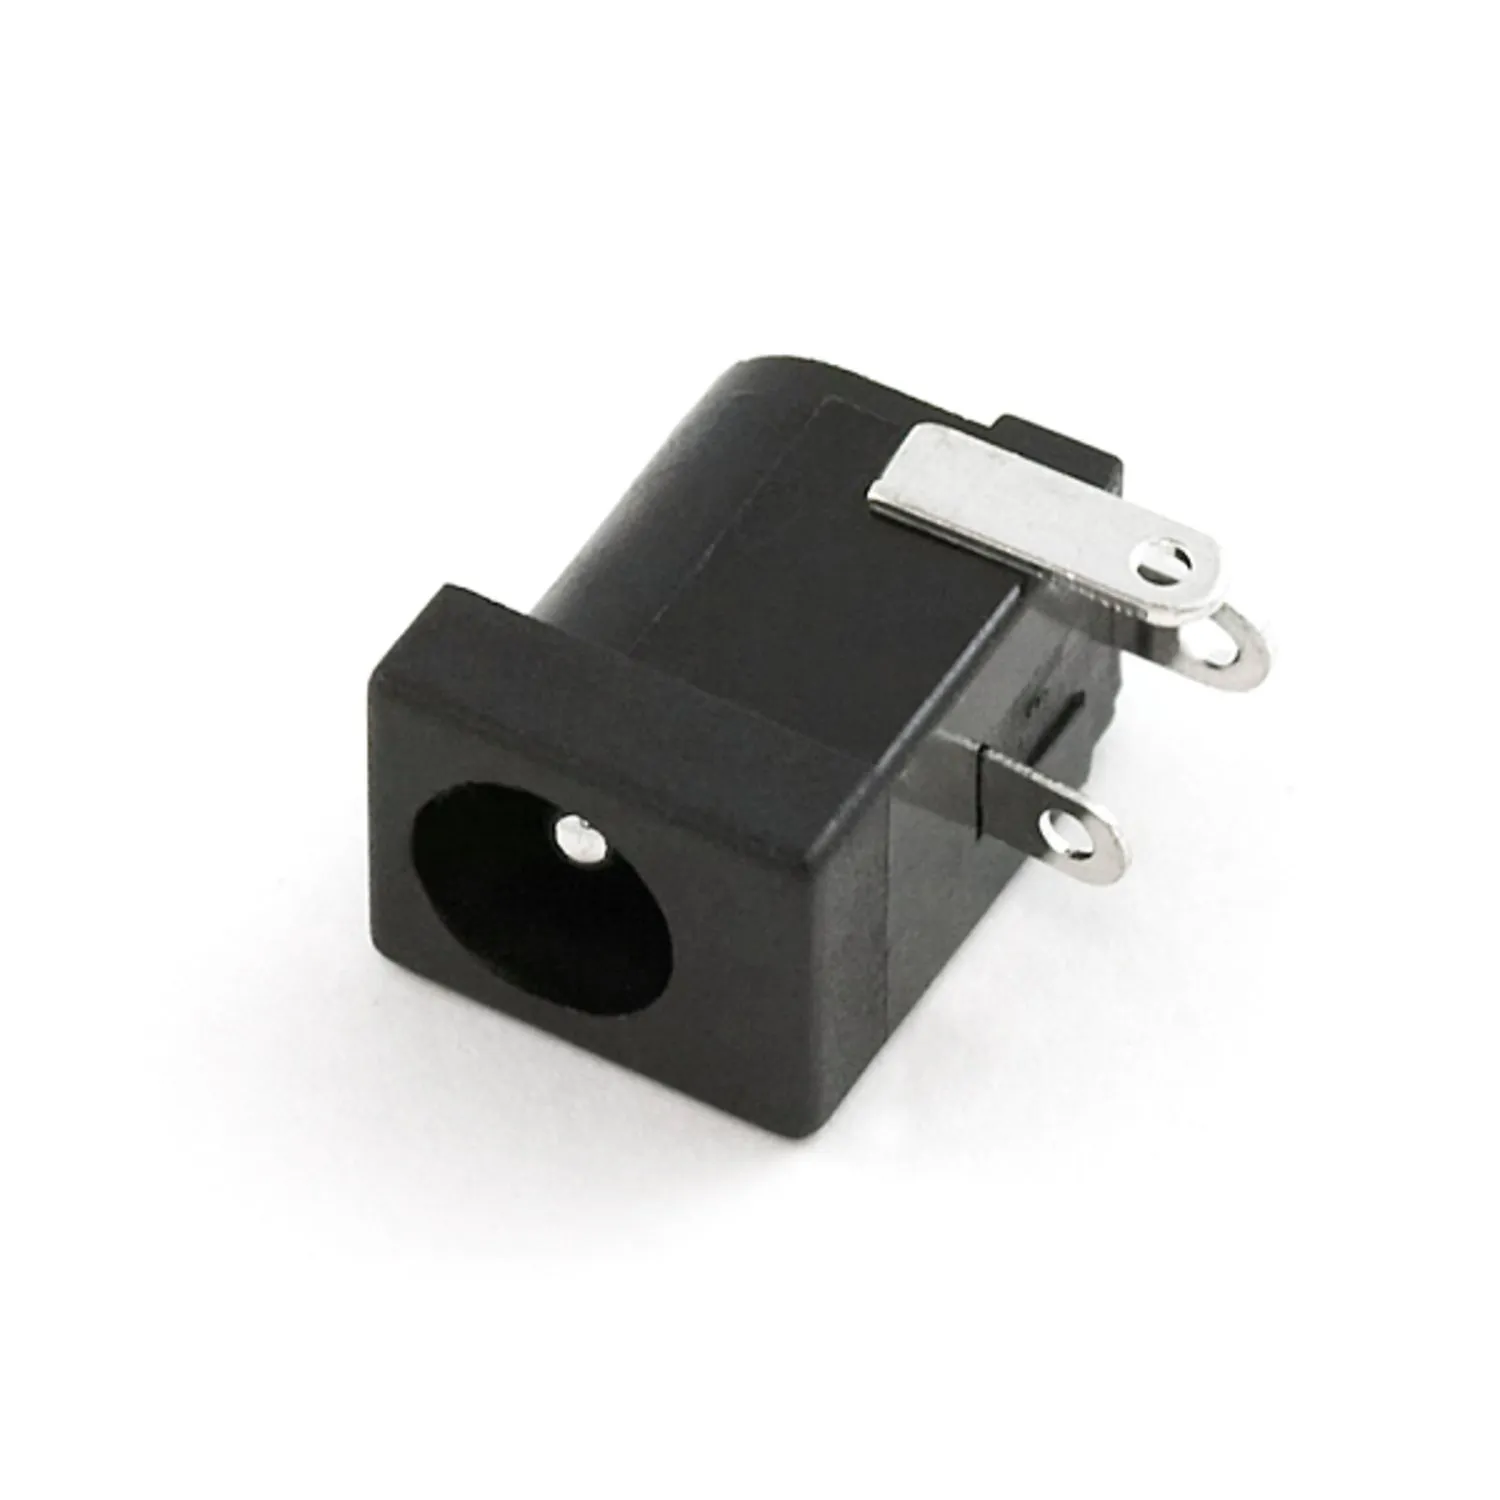 Photo of DC Barrel Power Jack/Connector